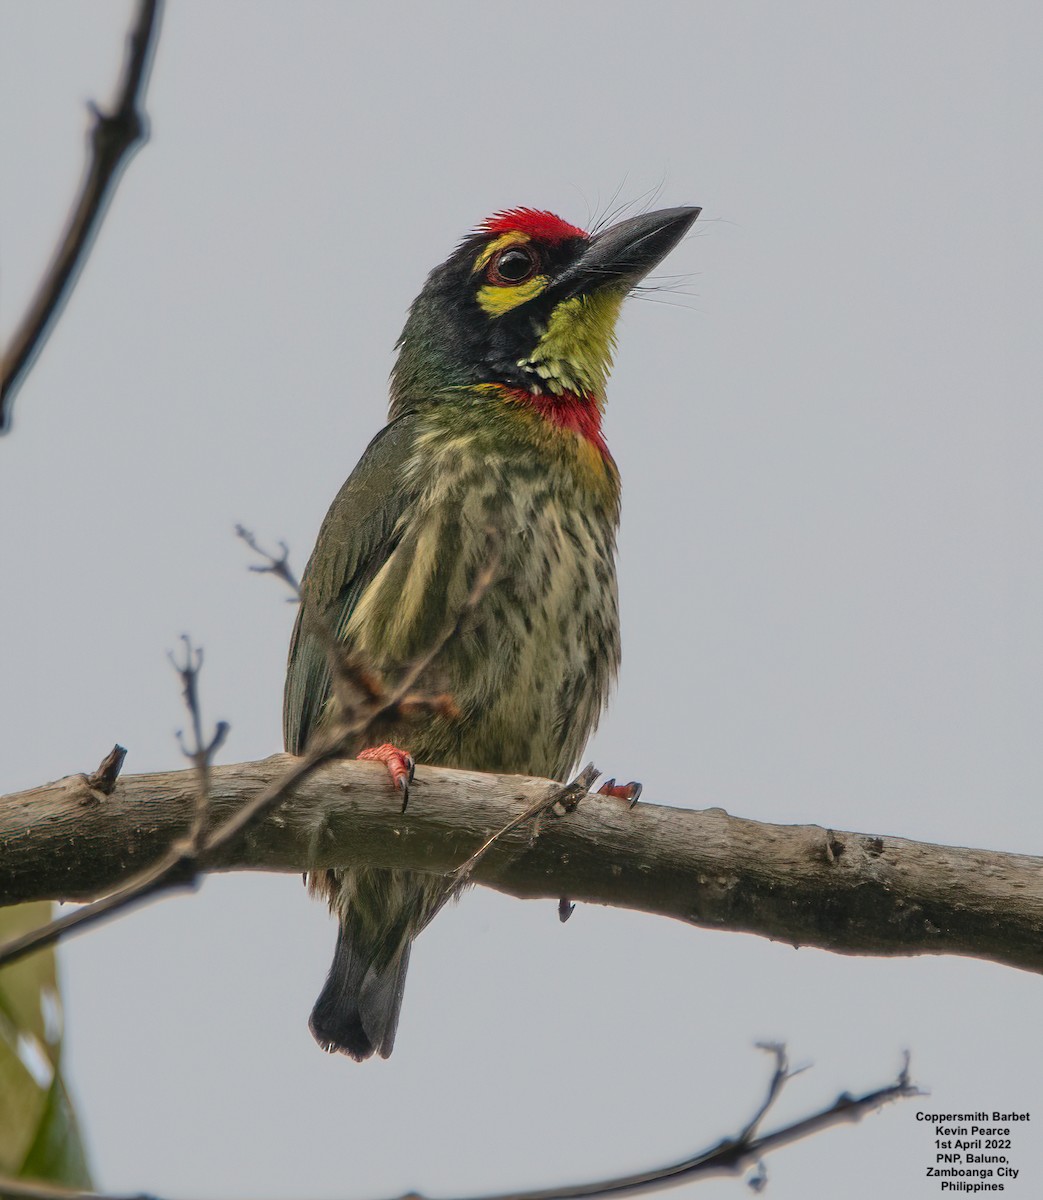 Coppersmith Barbet - Kevin Pearce